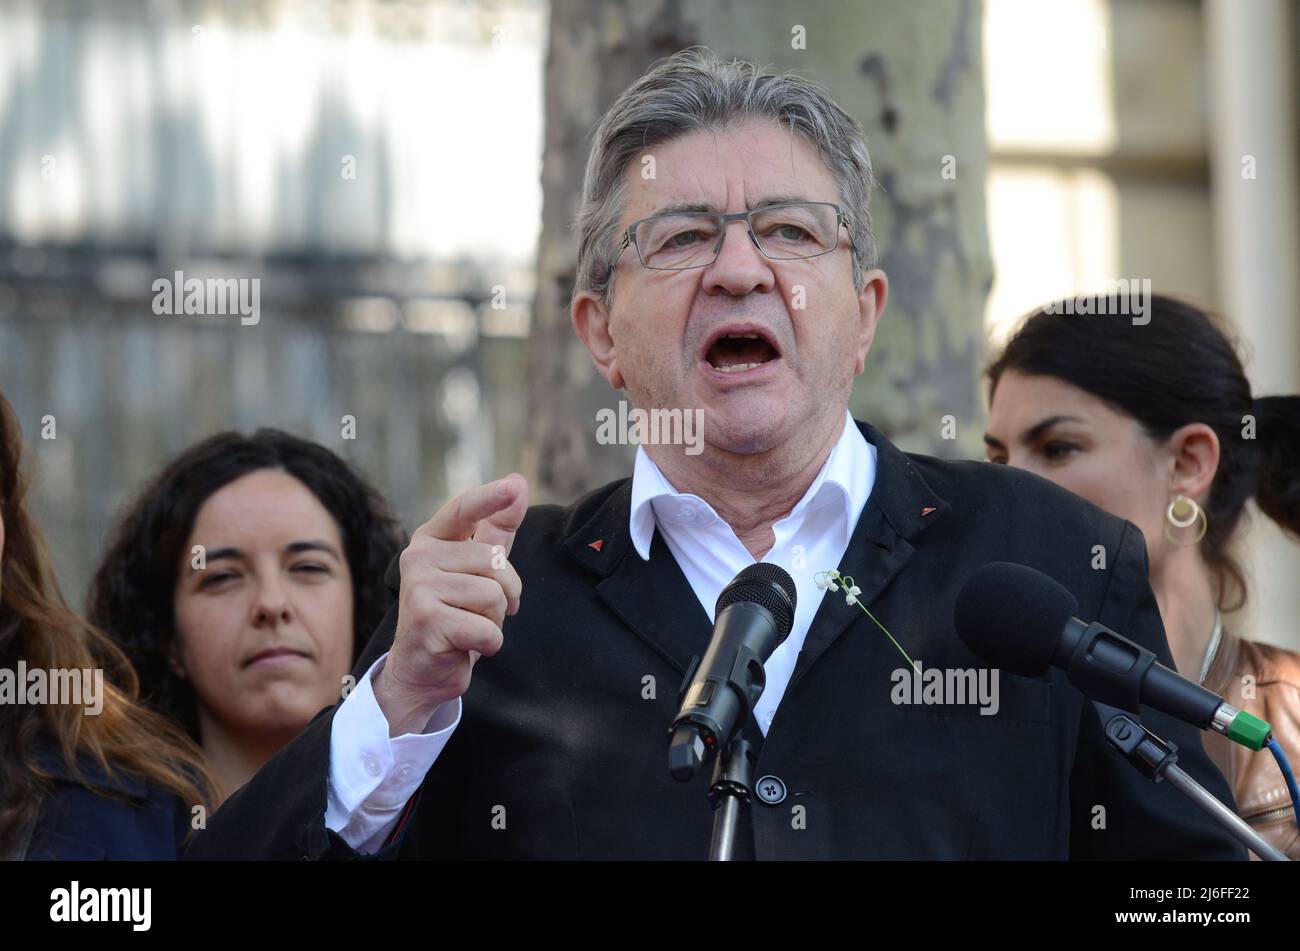 jean luc melenchon was expected by several hundred people for his speech on may 1st at the 'place de la république' in Paris Stock Photo